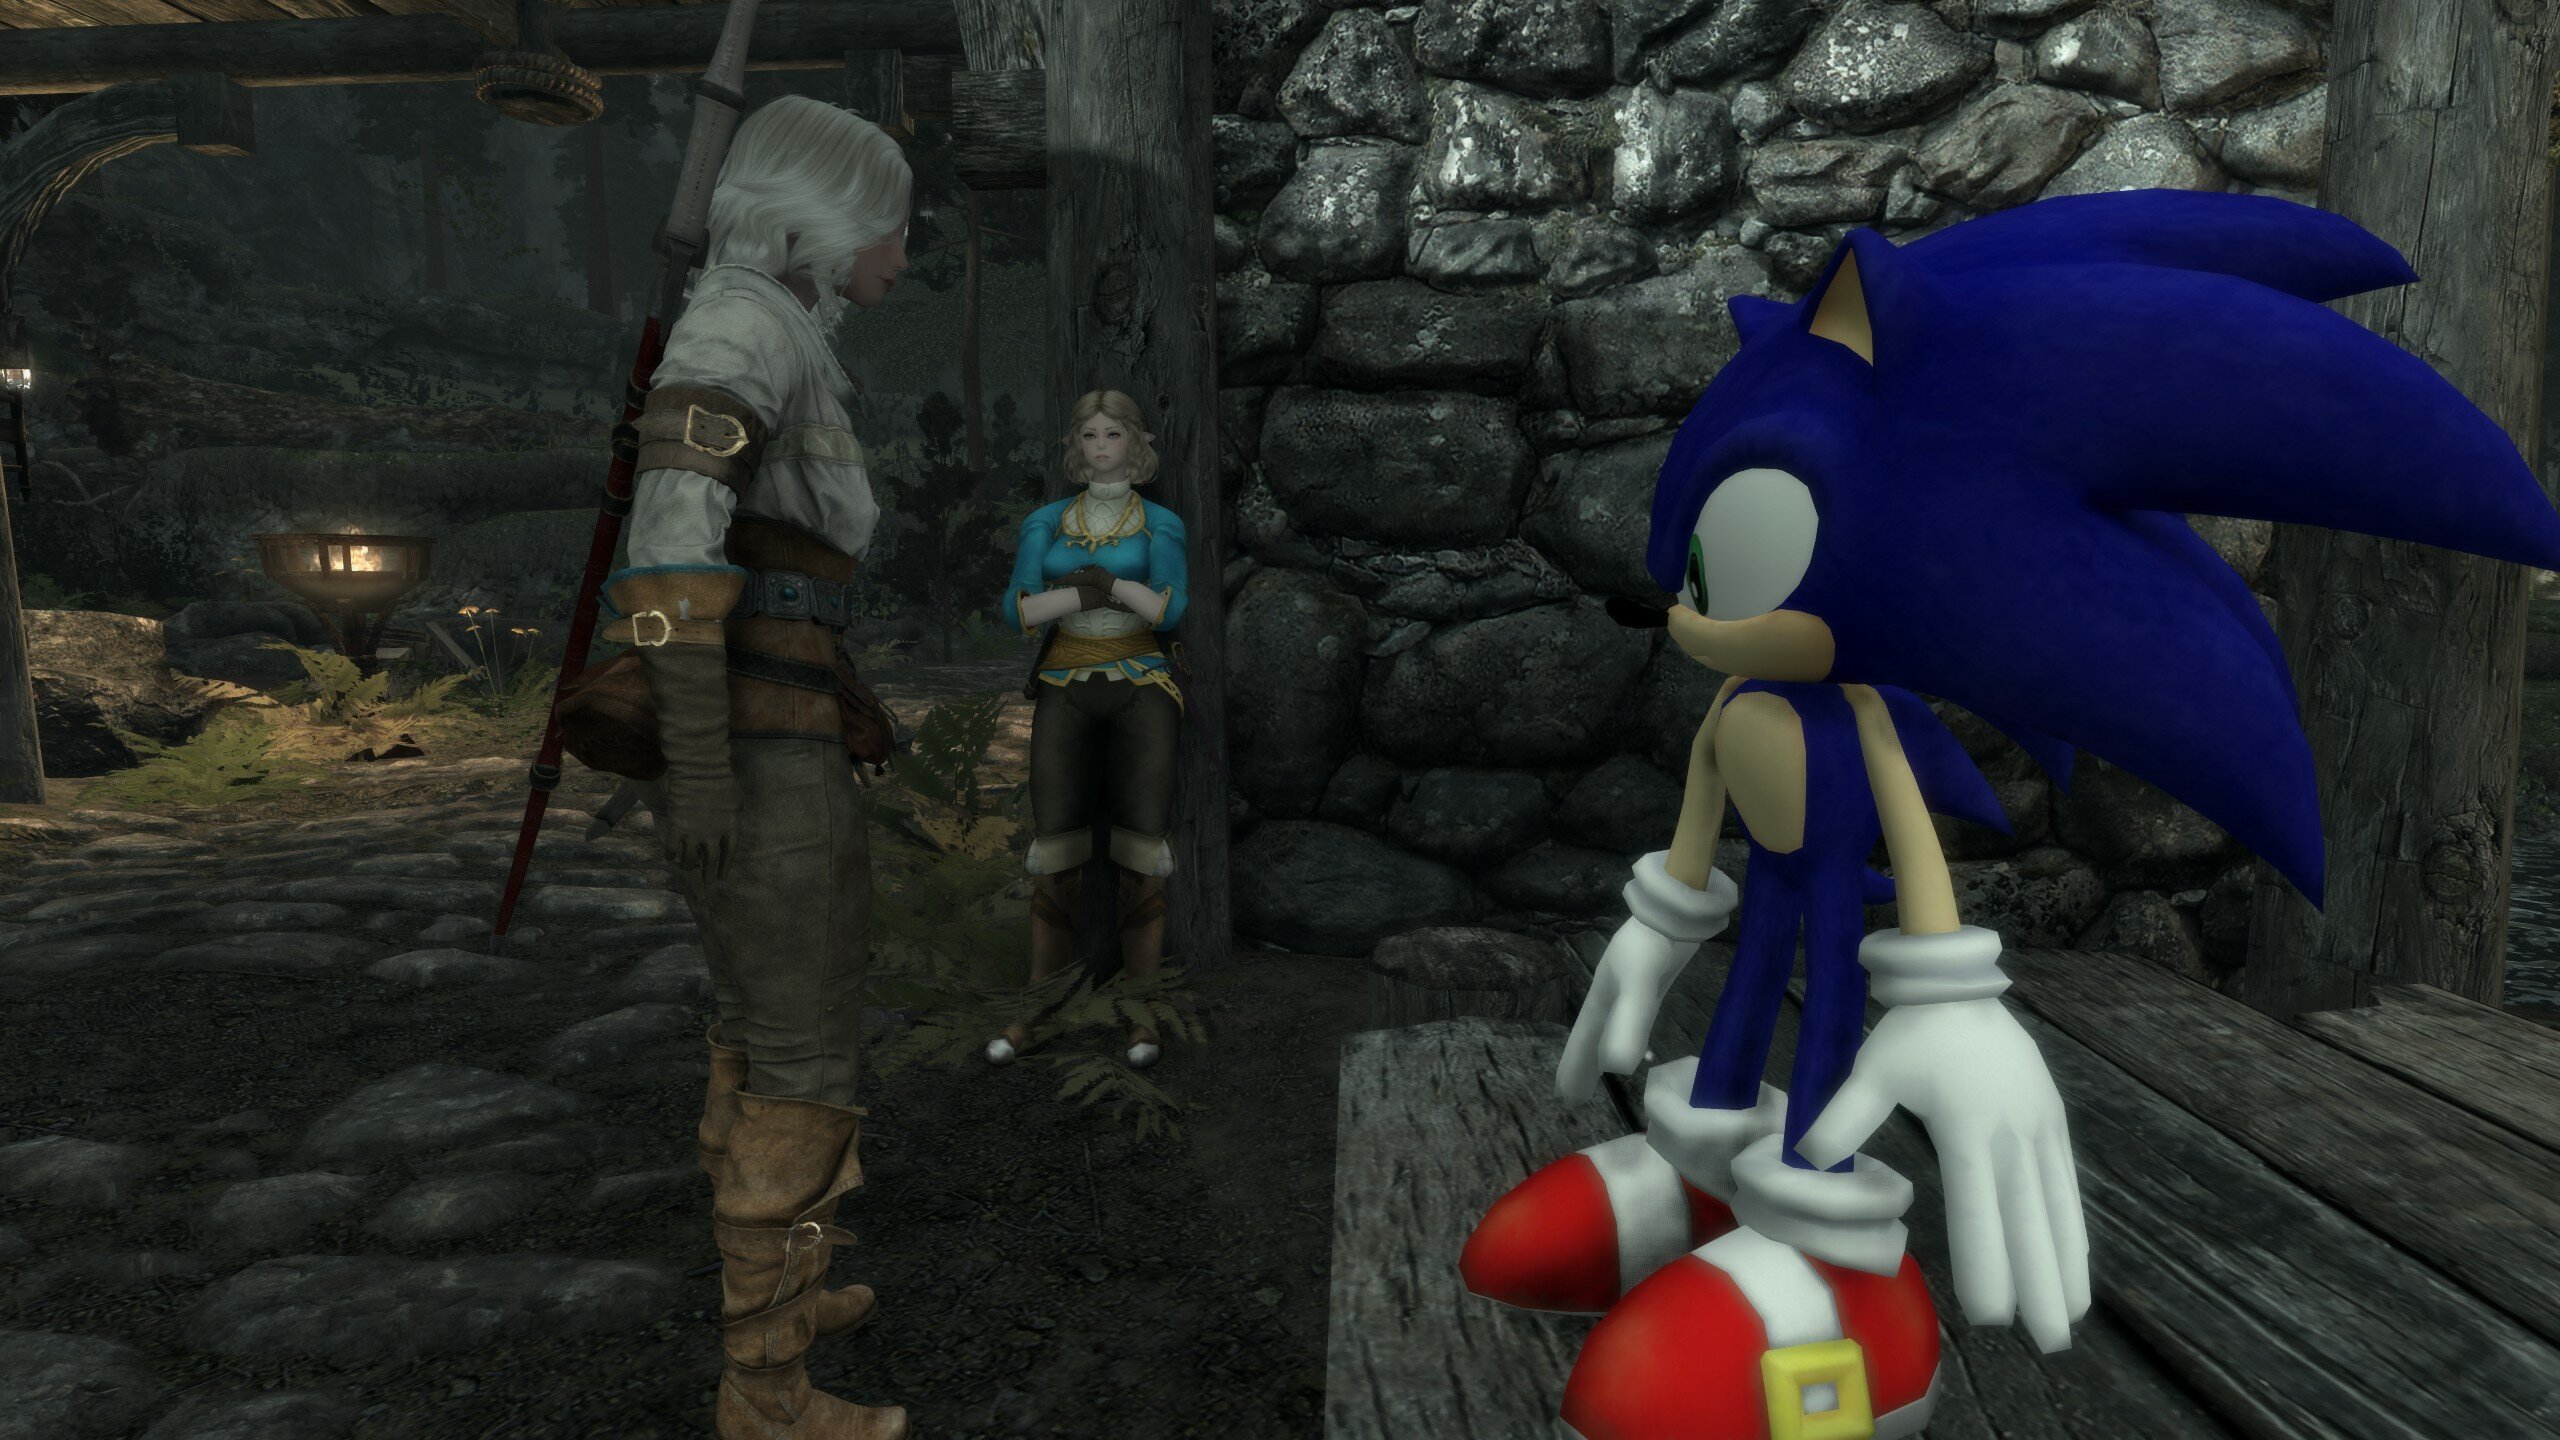 skill issue mod [Sonic the Hedgehog Forever] [Mods]